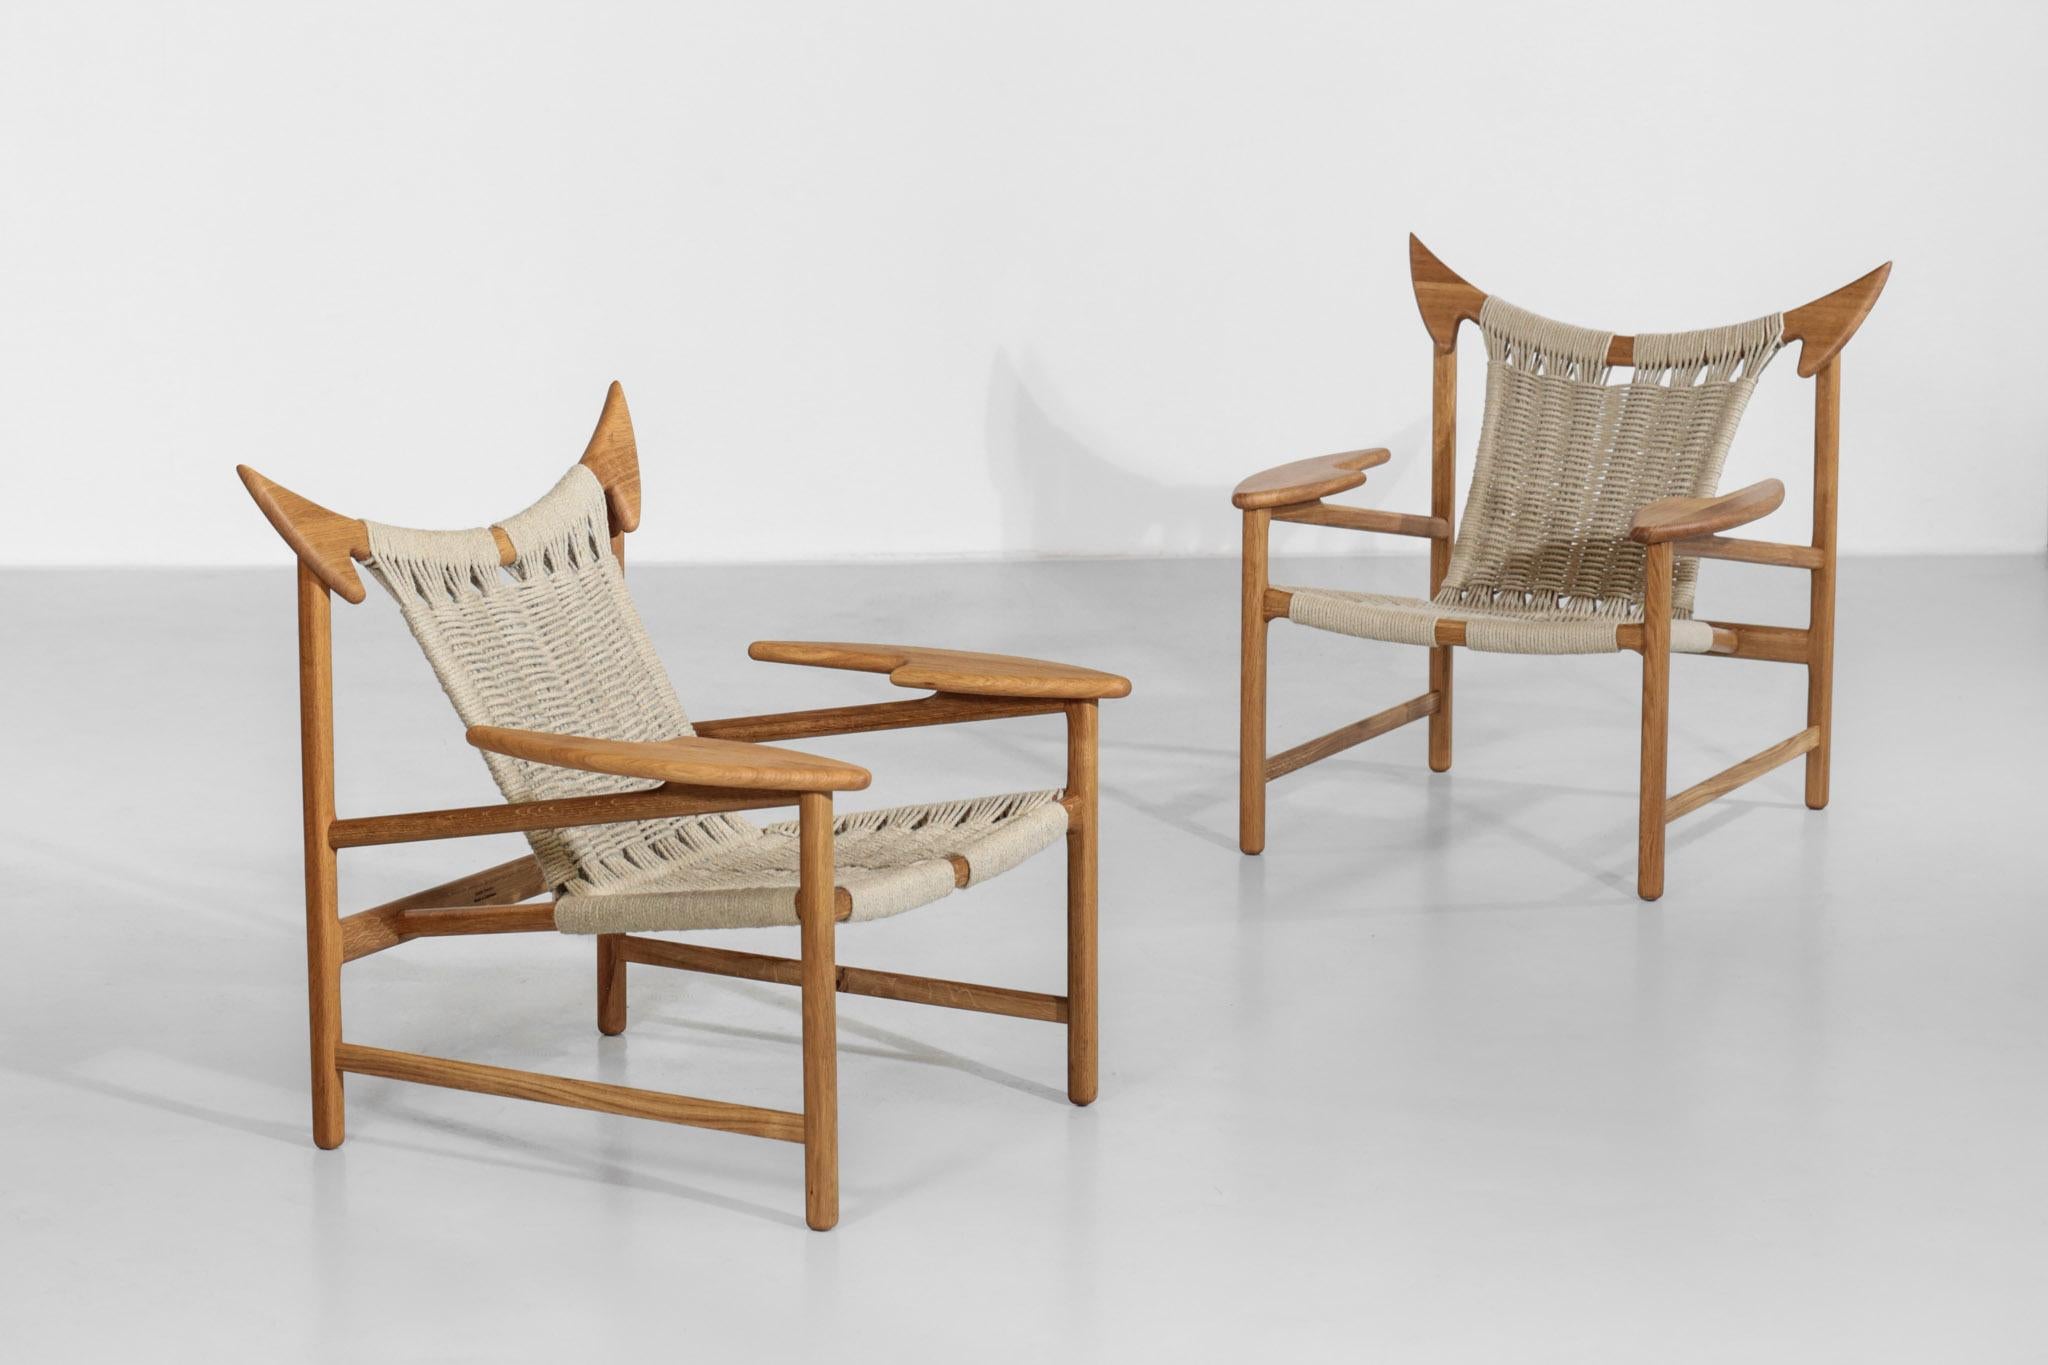 Pair of Danish easy chair de fauteuils. Modern manufacture by Godsk cabinetmaker. Structure in massive oak with hemp rope seat. All handcrafted, incredible manufacture.